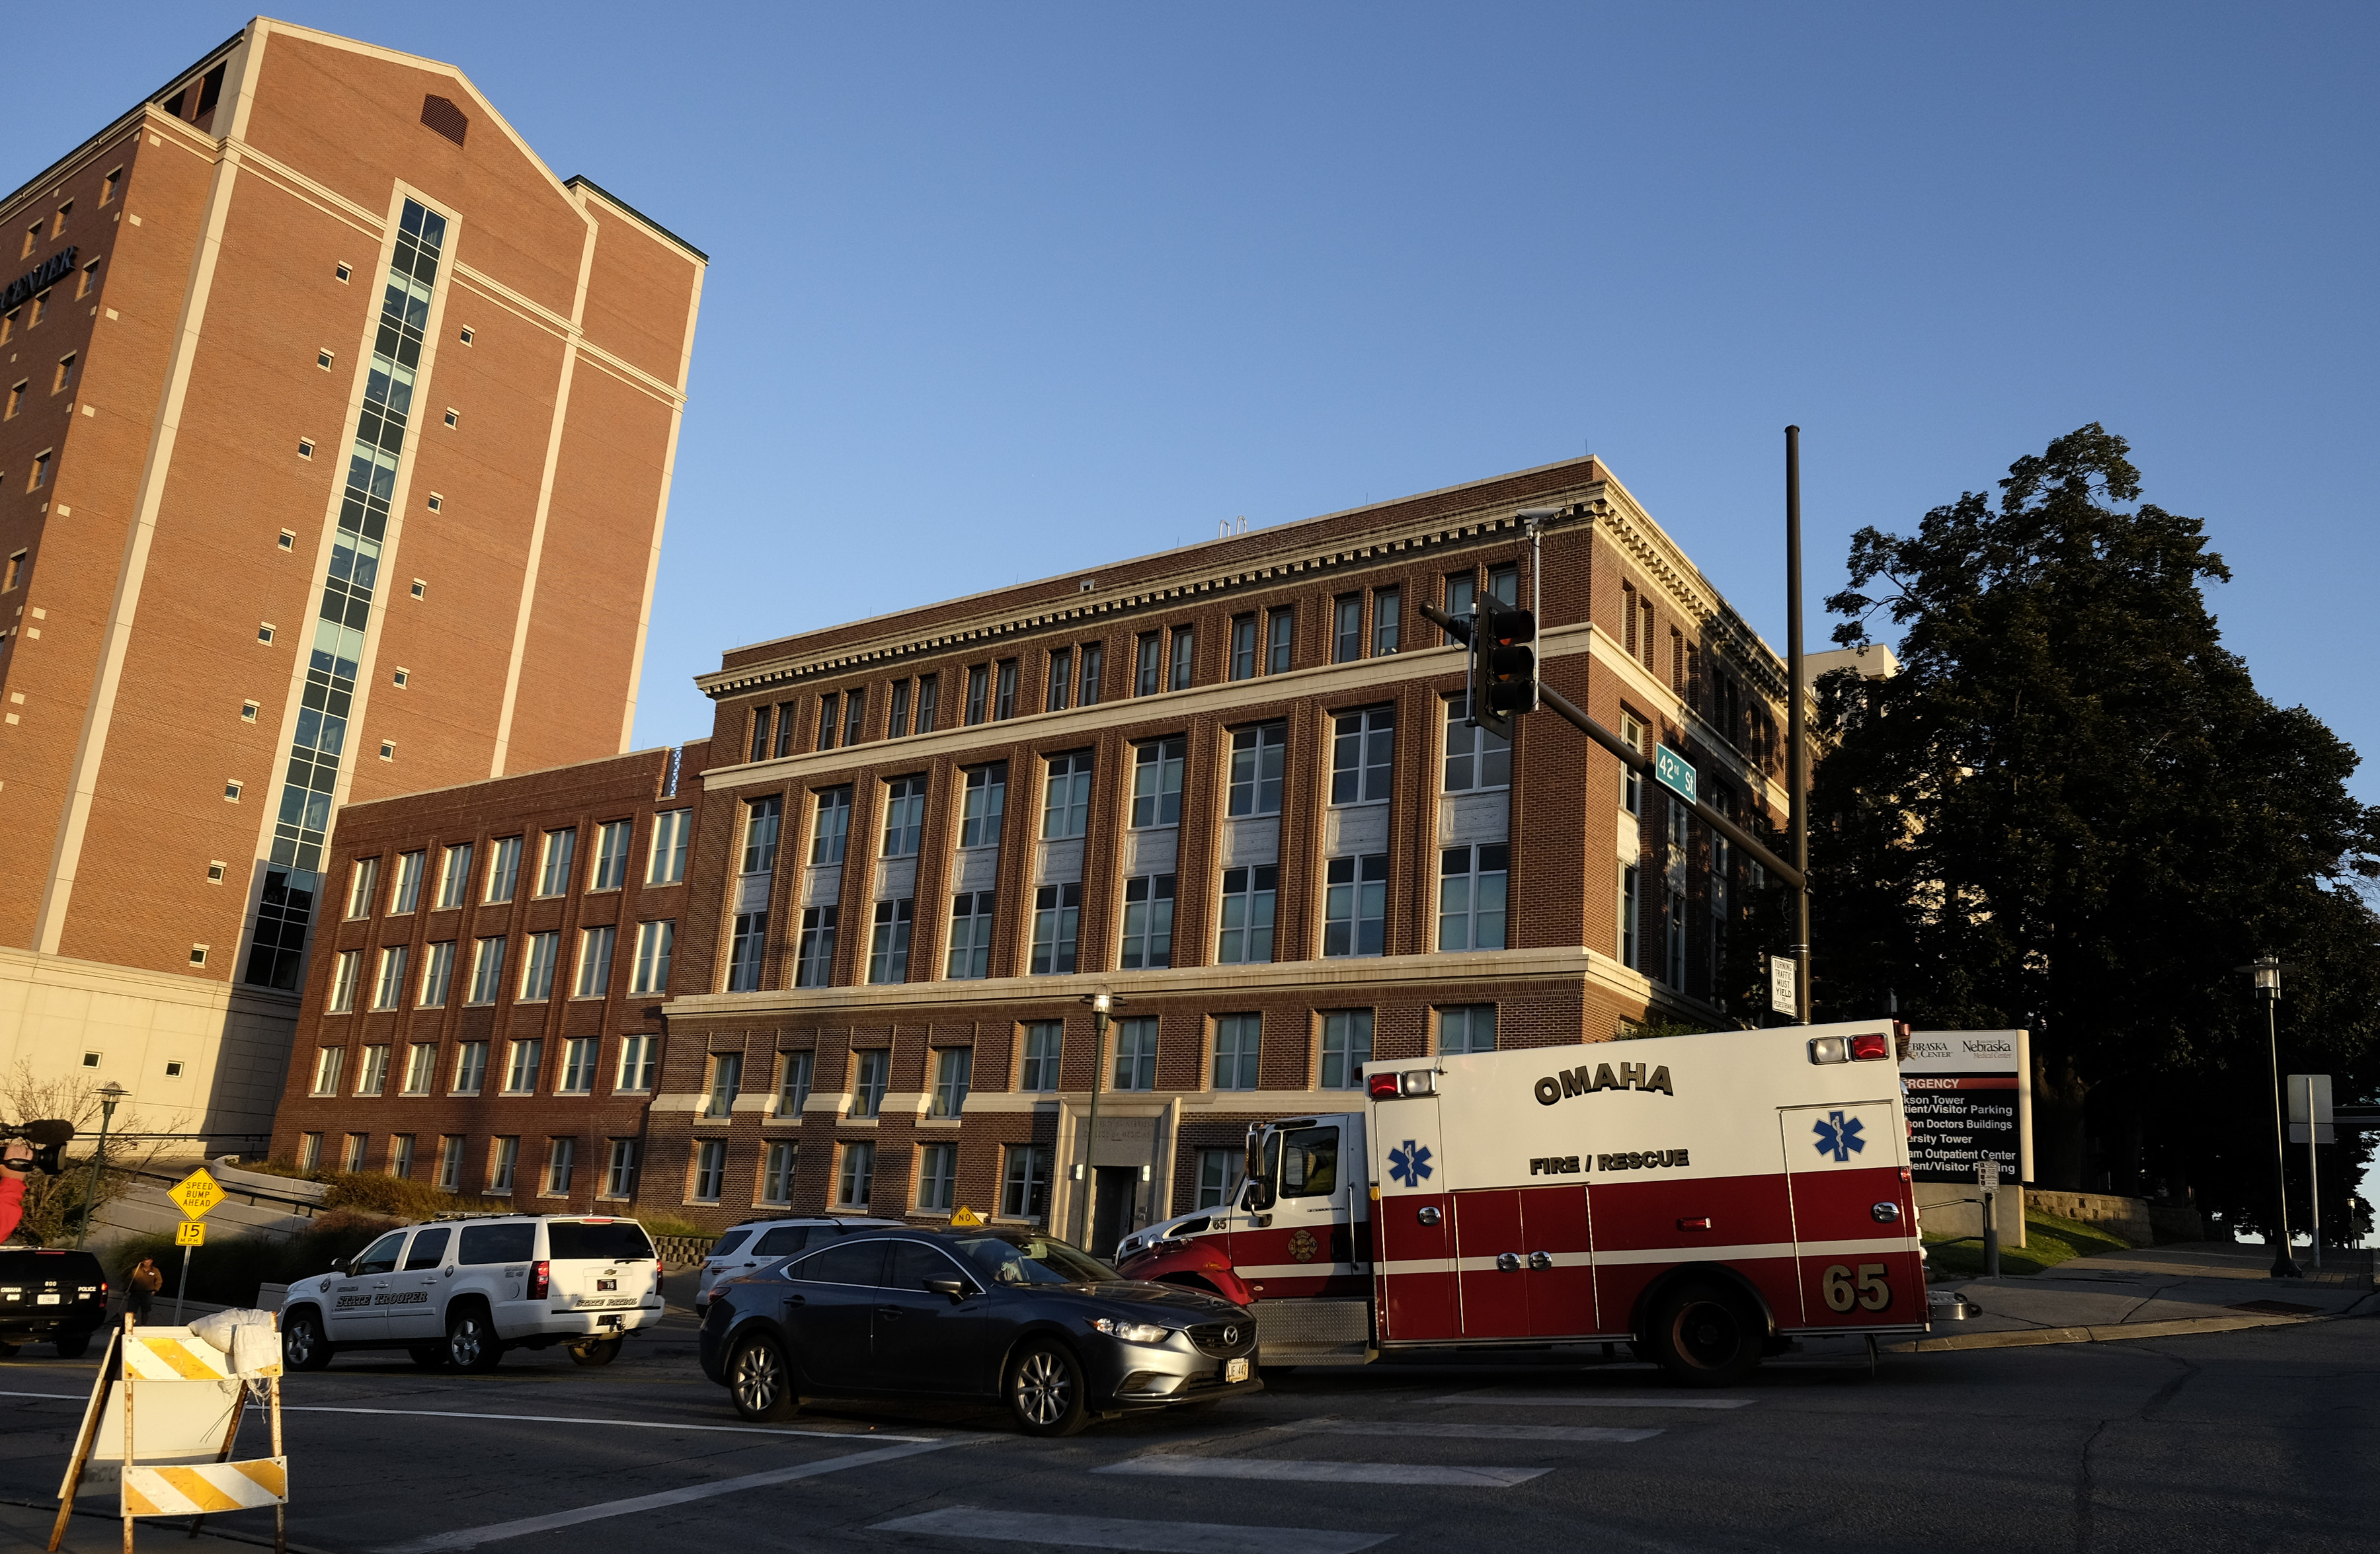 US Journalist Who Contracted Ebola In Liberia Treated At Nebraska Medical Center